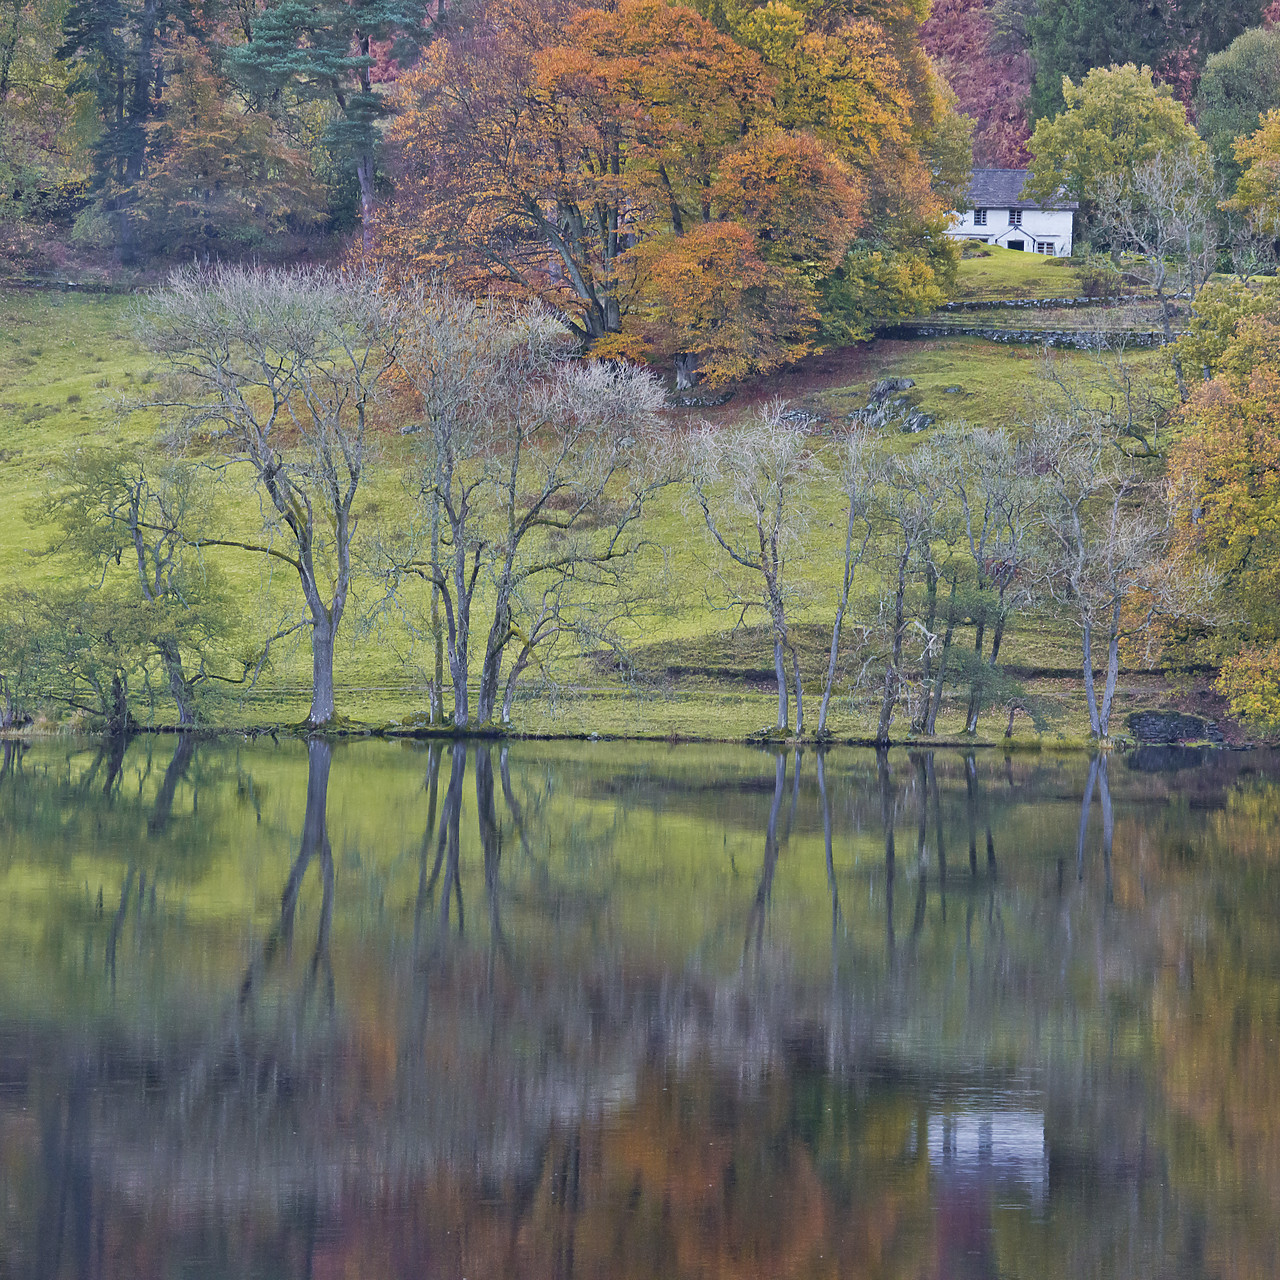 #130394-1 - Cottage Reflecting in Loughrigg Tarn in Autumn, Lake District National Park, Cumbria, England